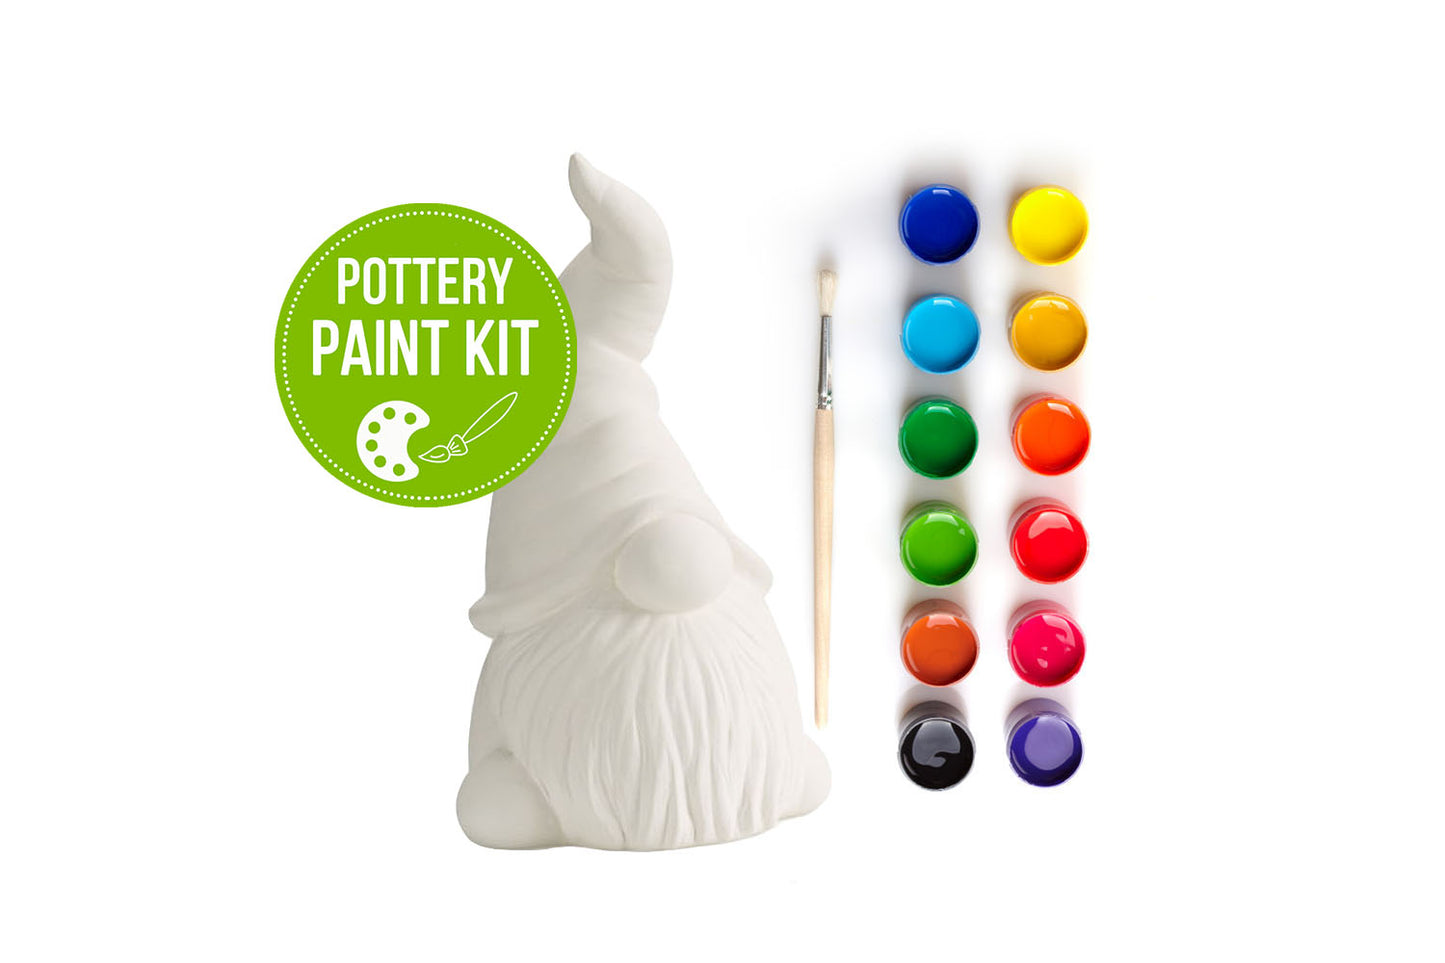 Gnomes Ceramic Painting Kit For Kids Adults And Teens With 3ml Paint Pod  Strips, 2 Brushes, 2 Ready-To-Paint Ceramics